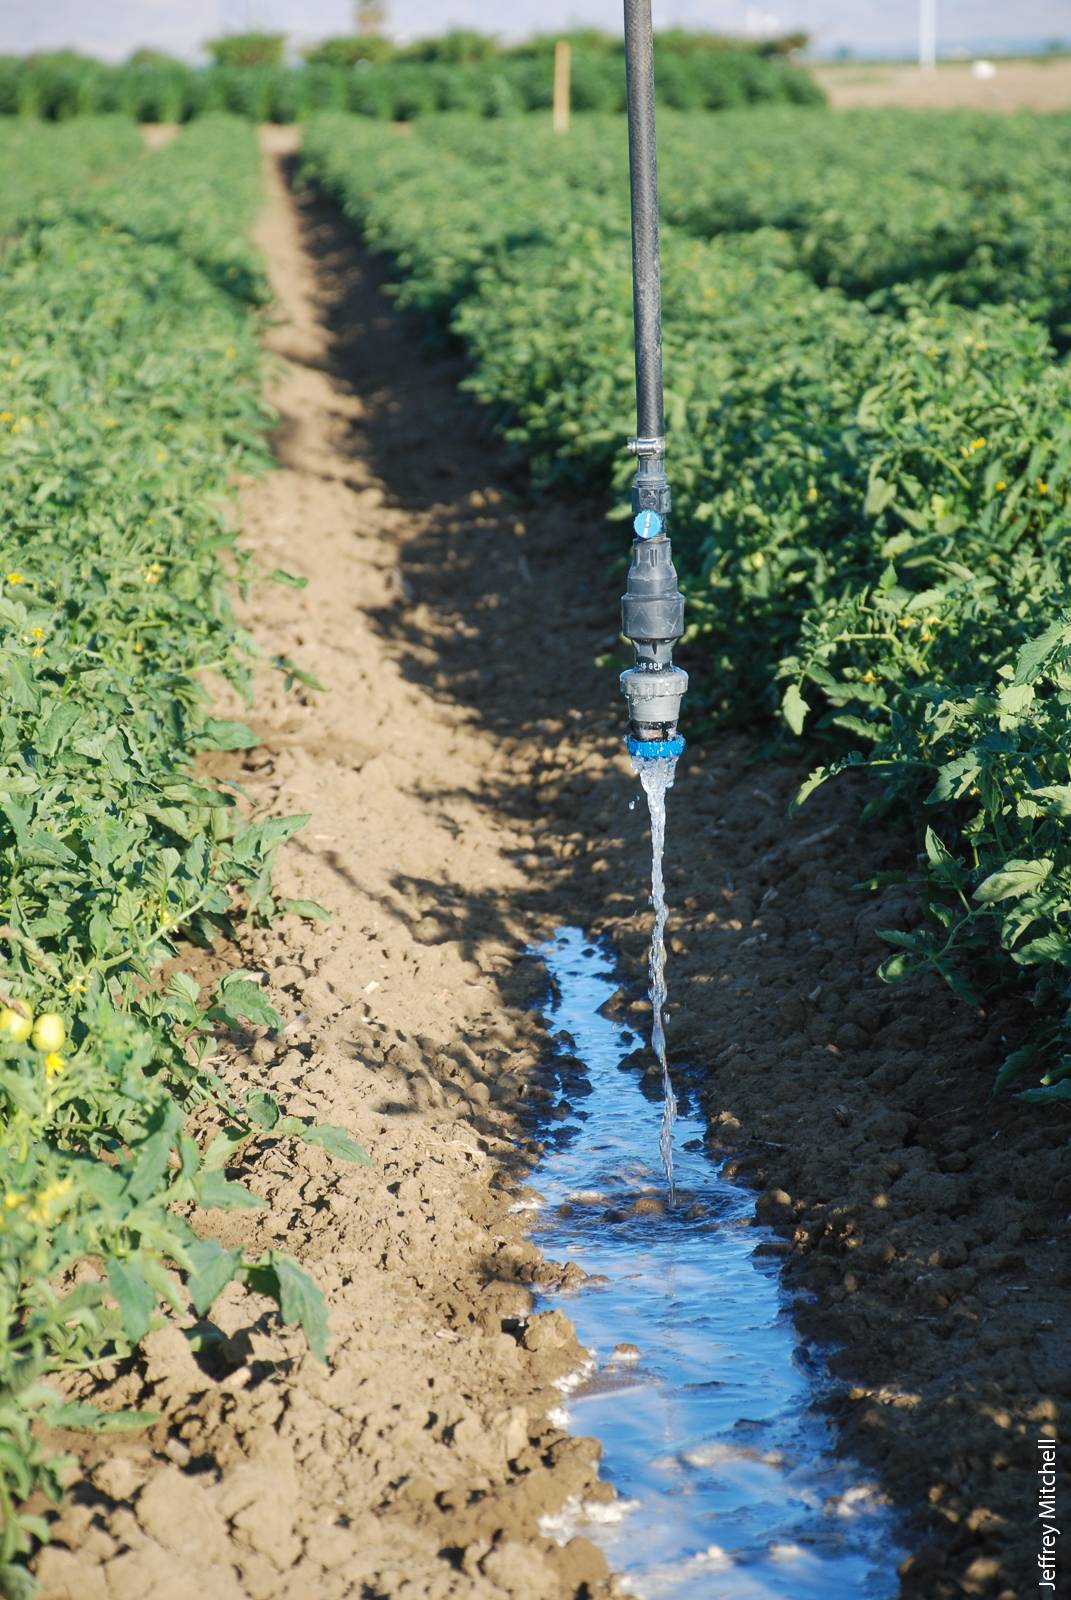 Researchers used bubbler nozzles, above, on the tomato crop from transplant establishment through the early vegetative growth phase to minimize soil evaporation.